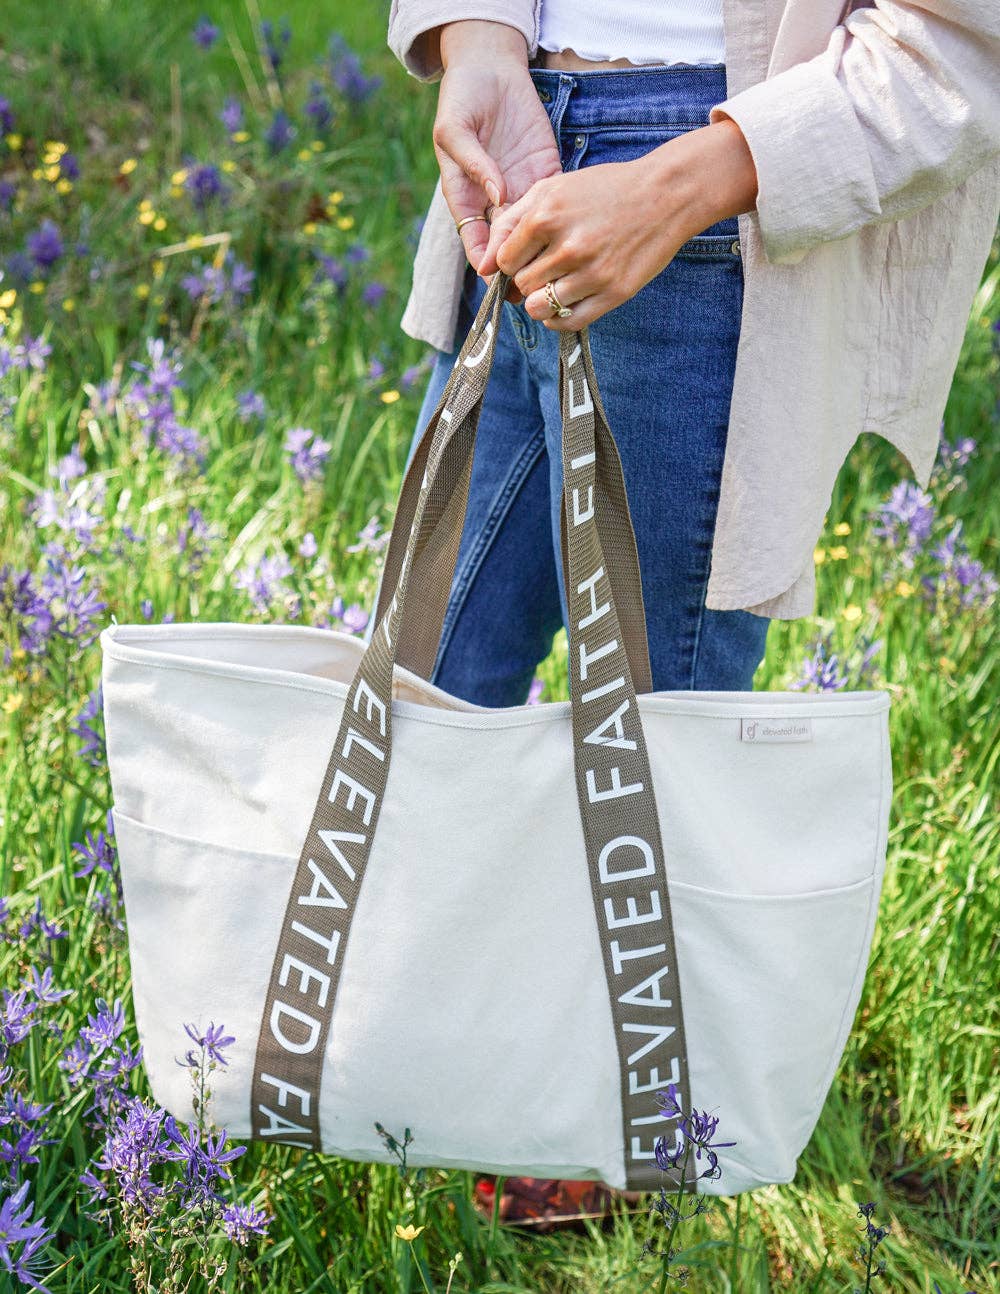 The Large Everyday Tote